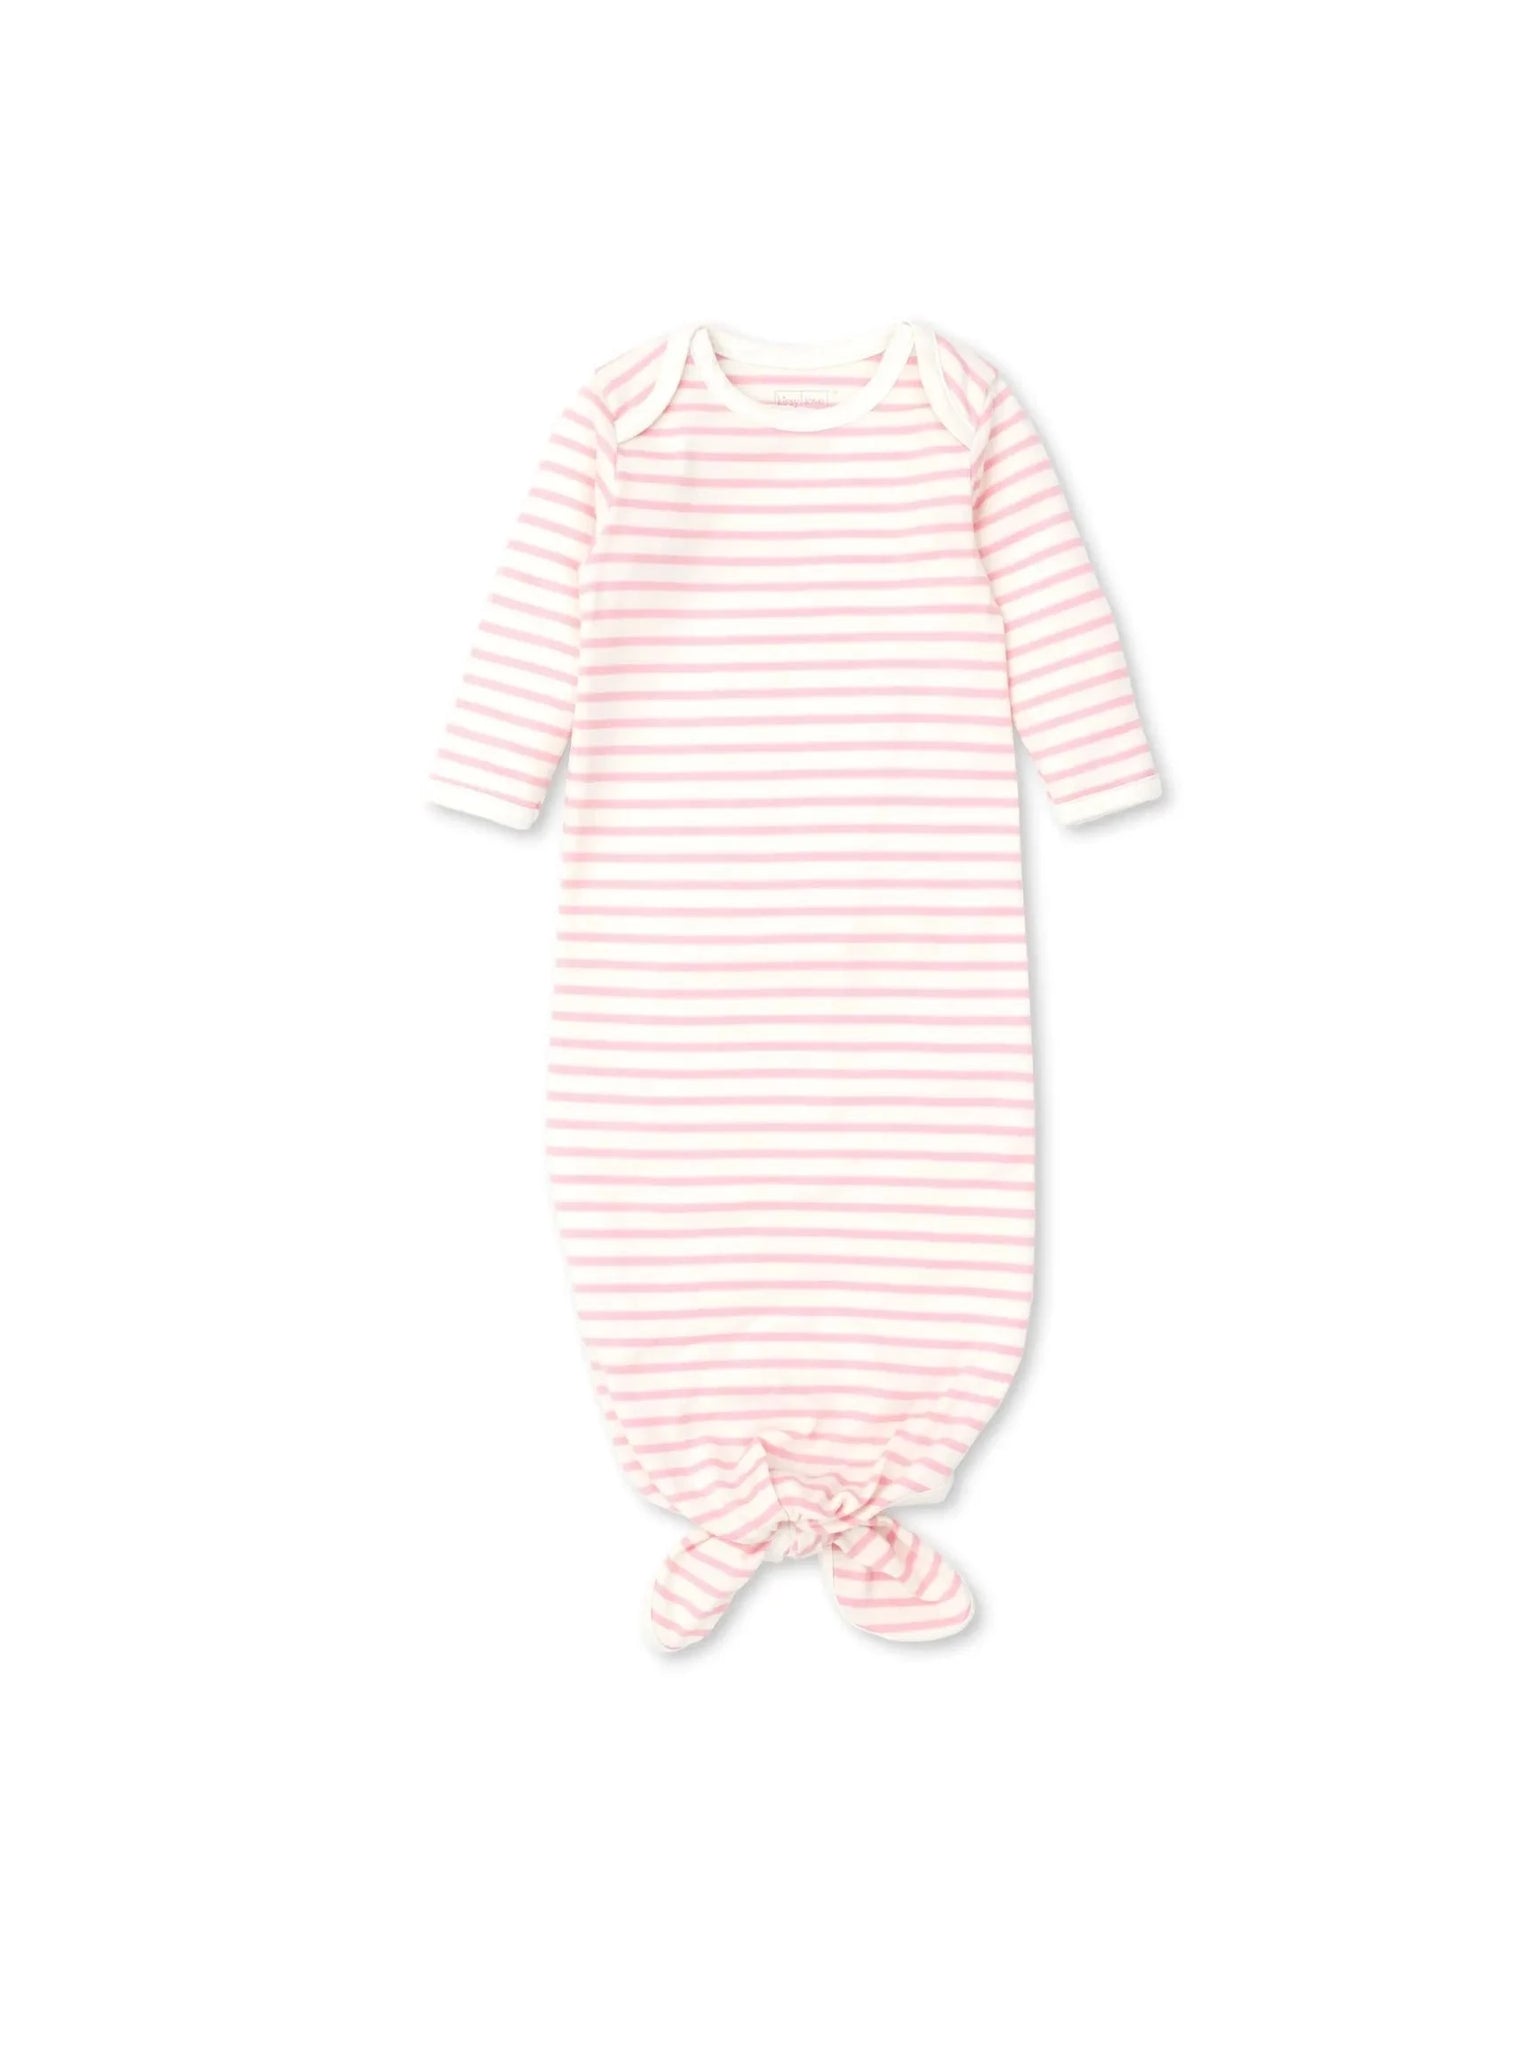 white and pink striped long sleeve knotted sleep sack